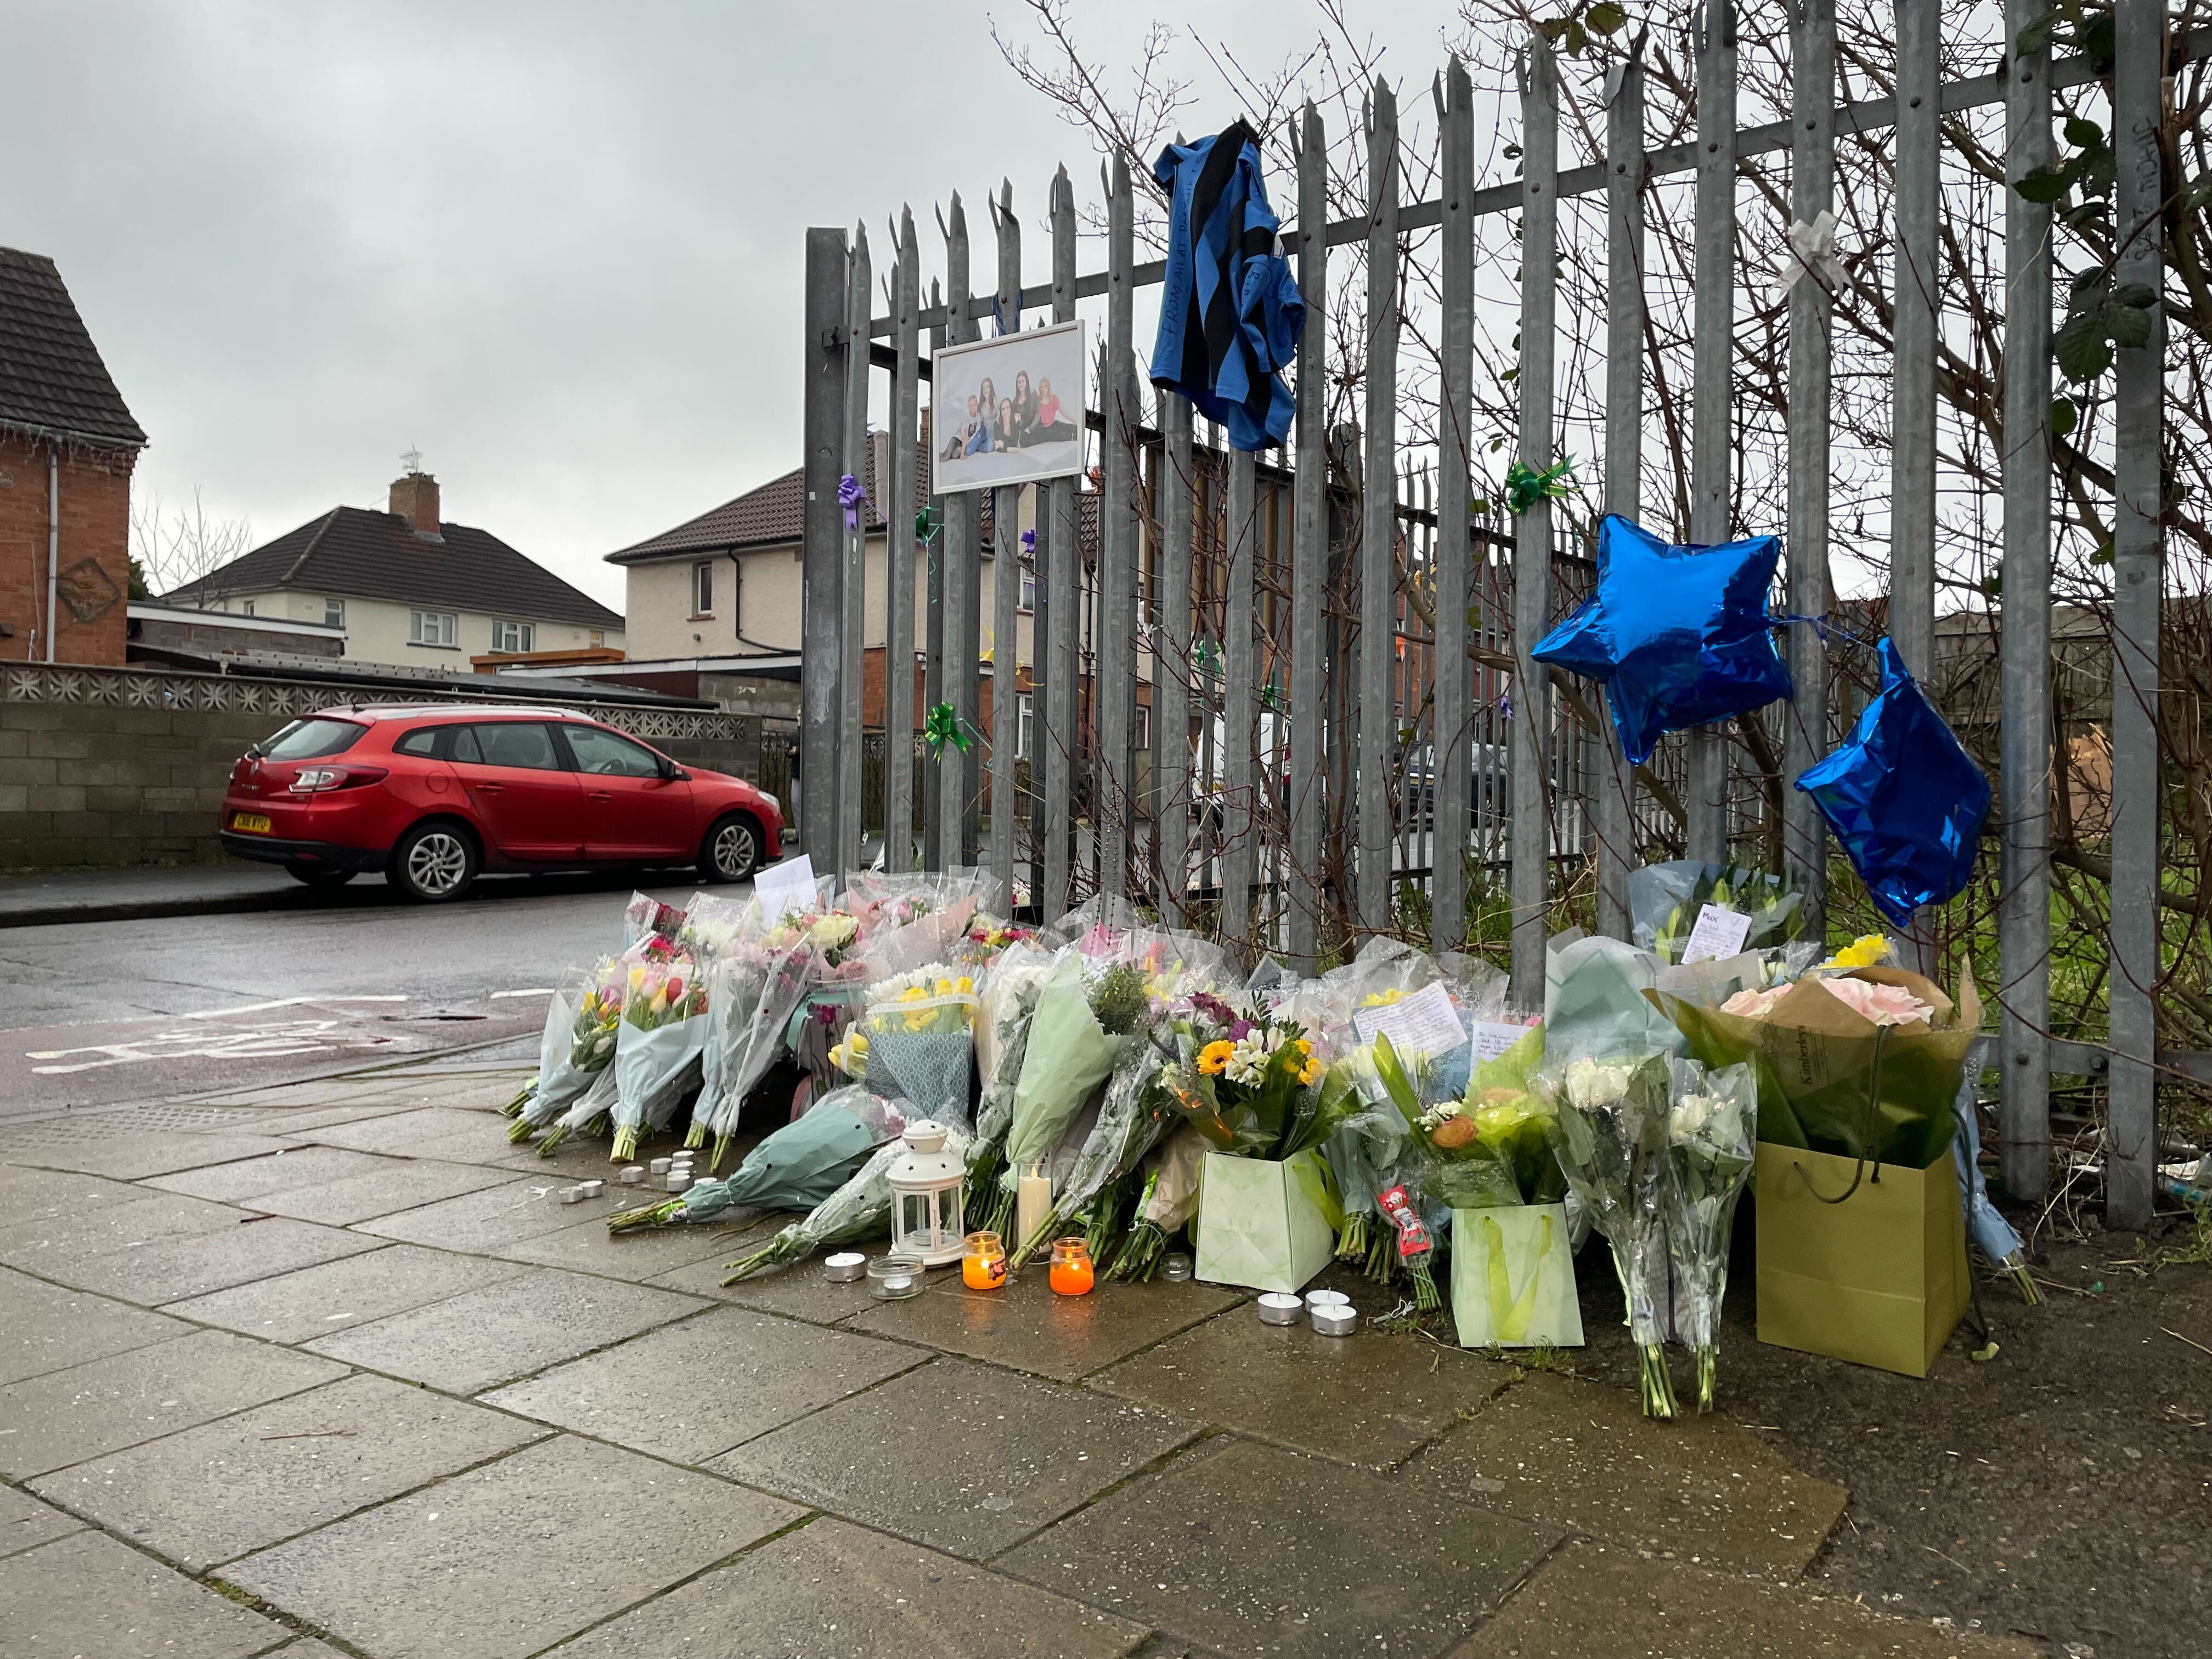 Tributes, candles and a family picture were left at the scene